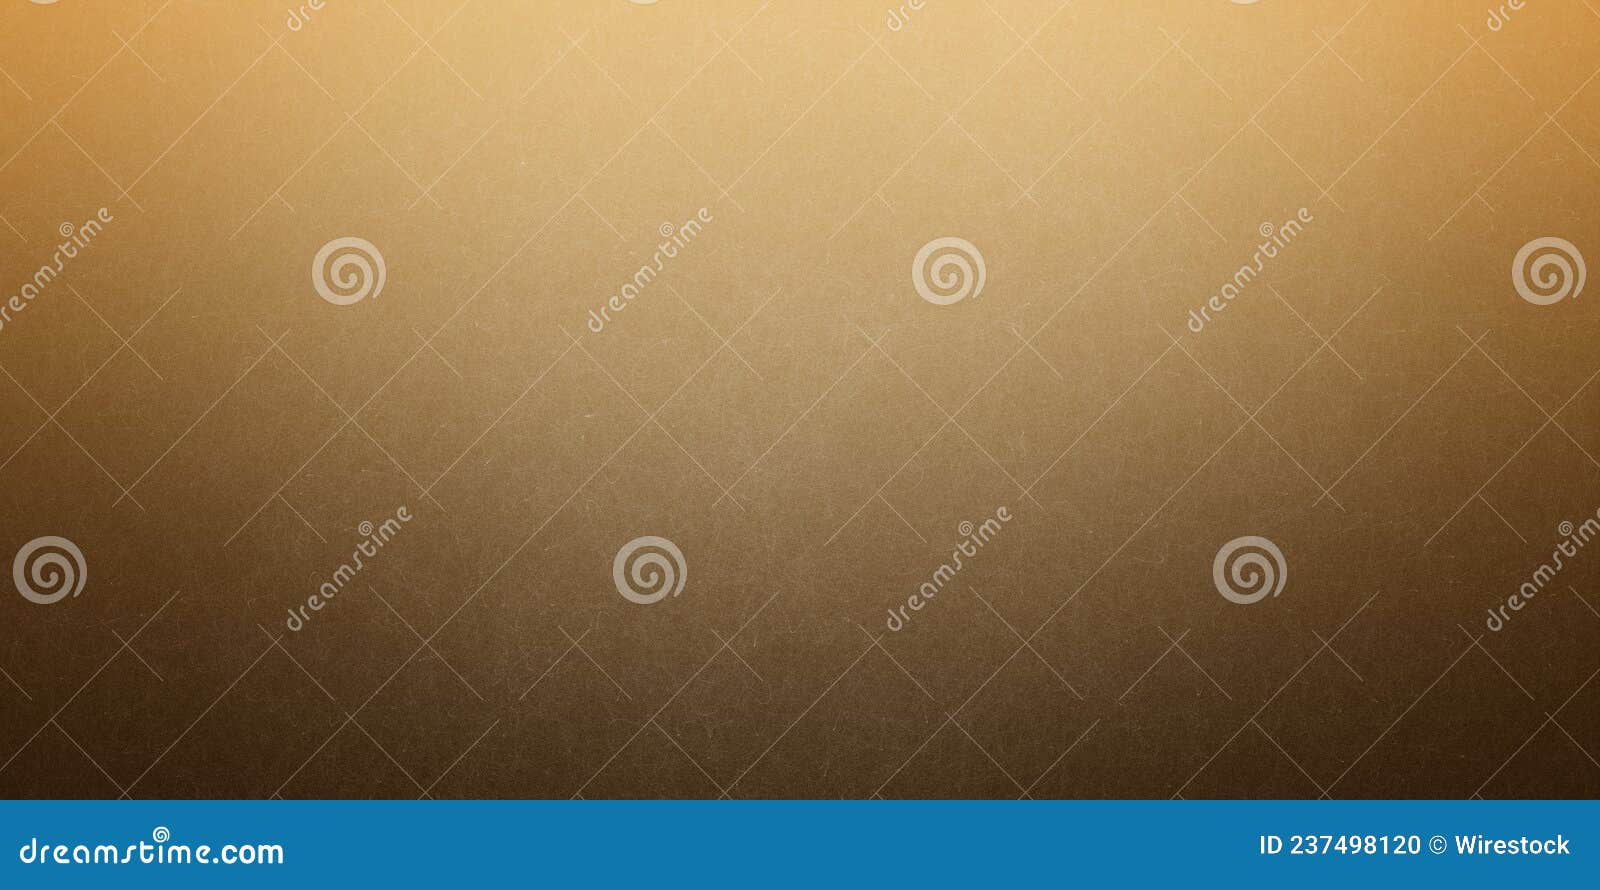 Gold textured background, Golden foil metallic sheet or paper for  advertising campaign and animation. Stock Illustration